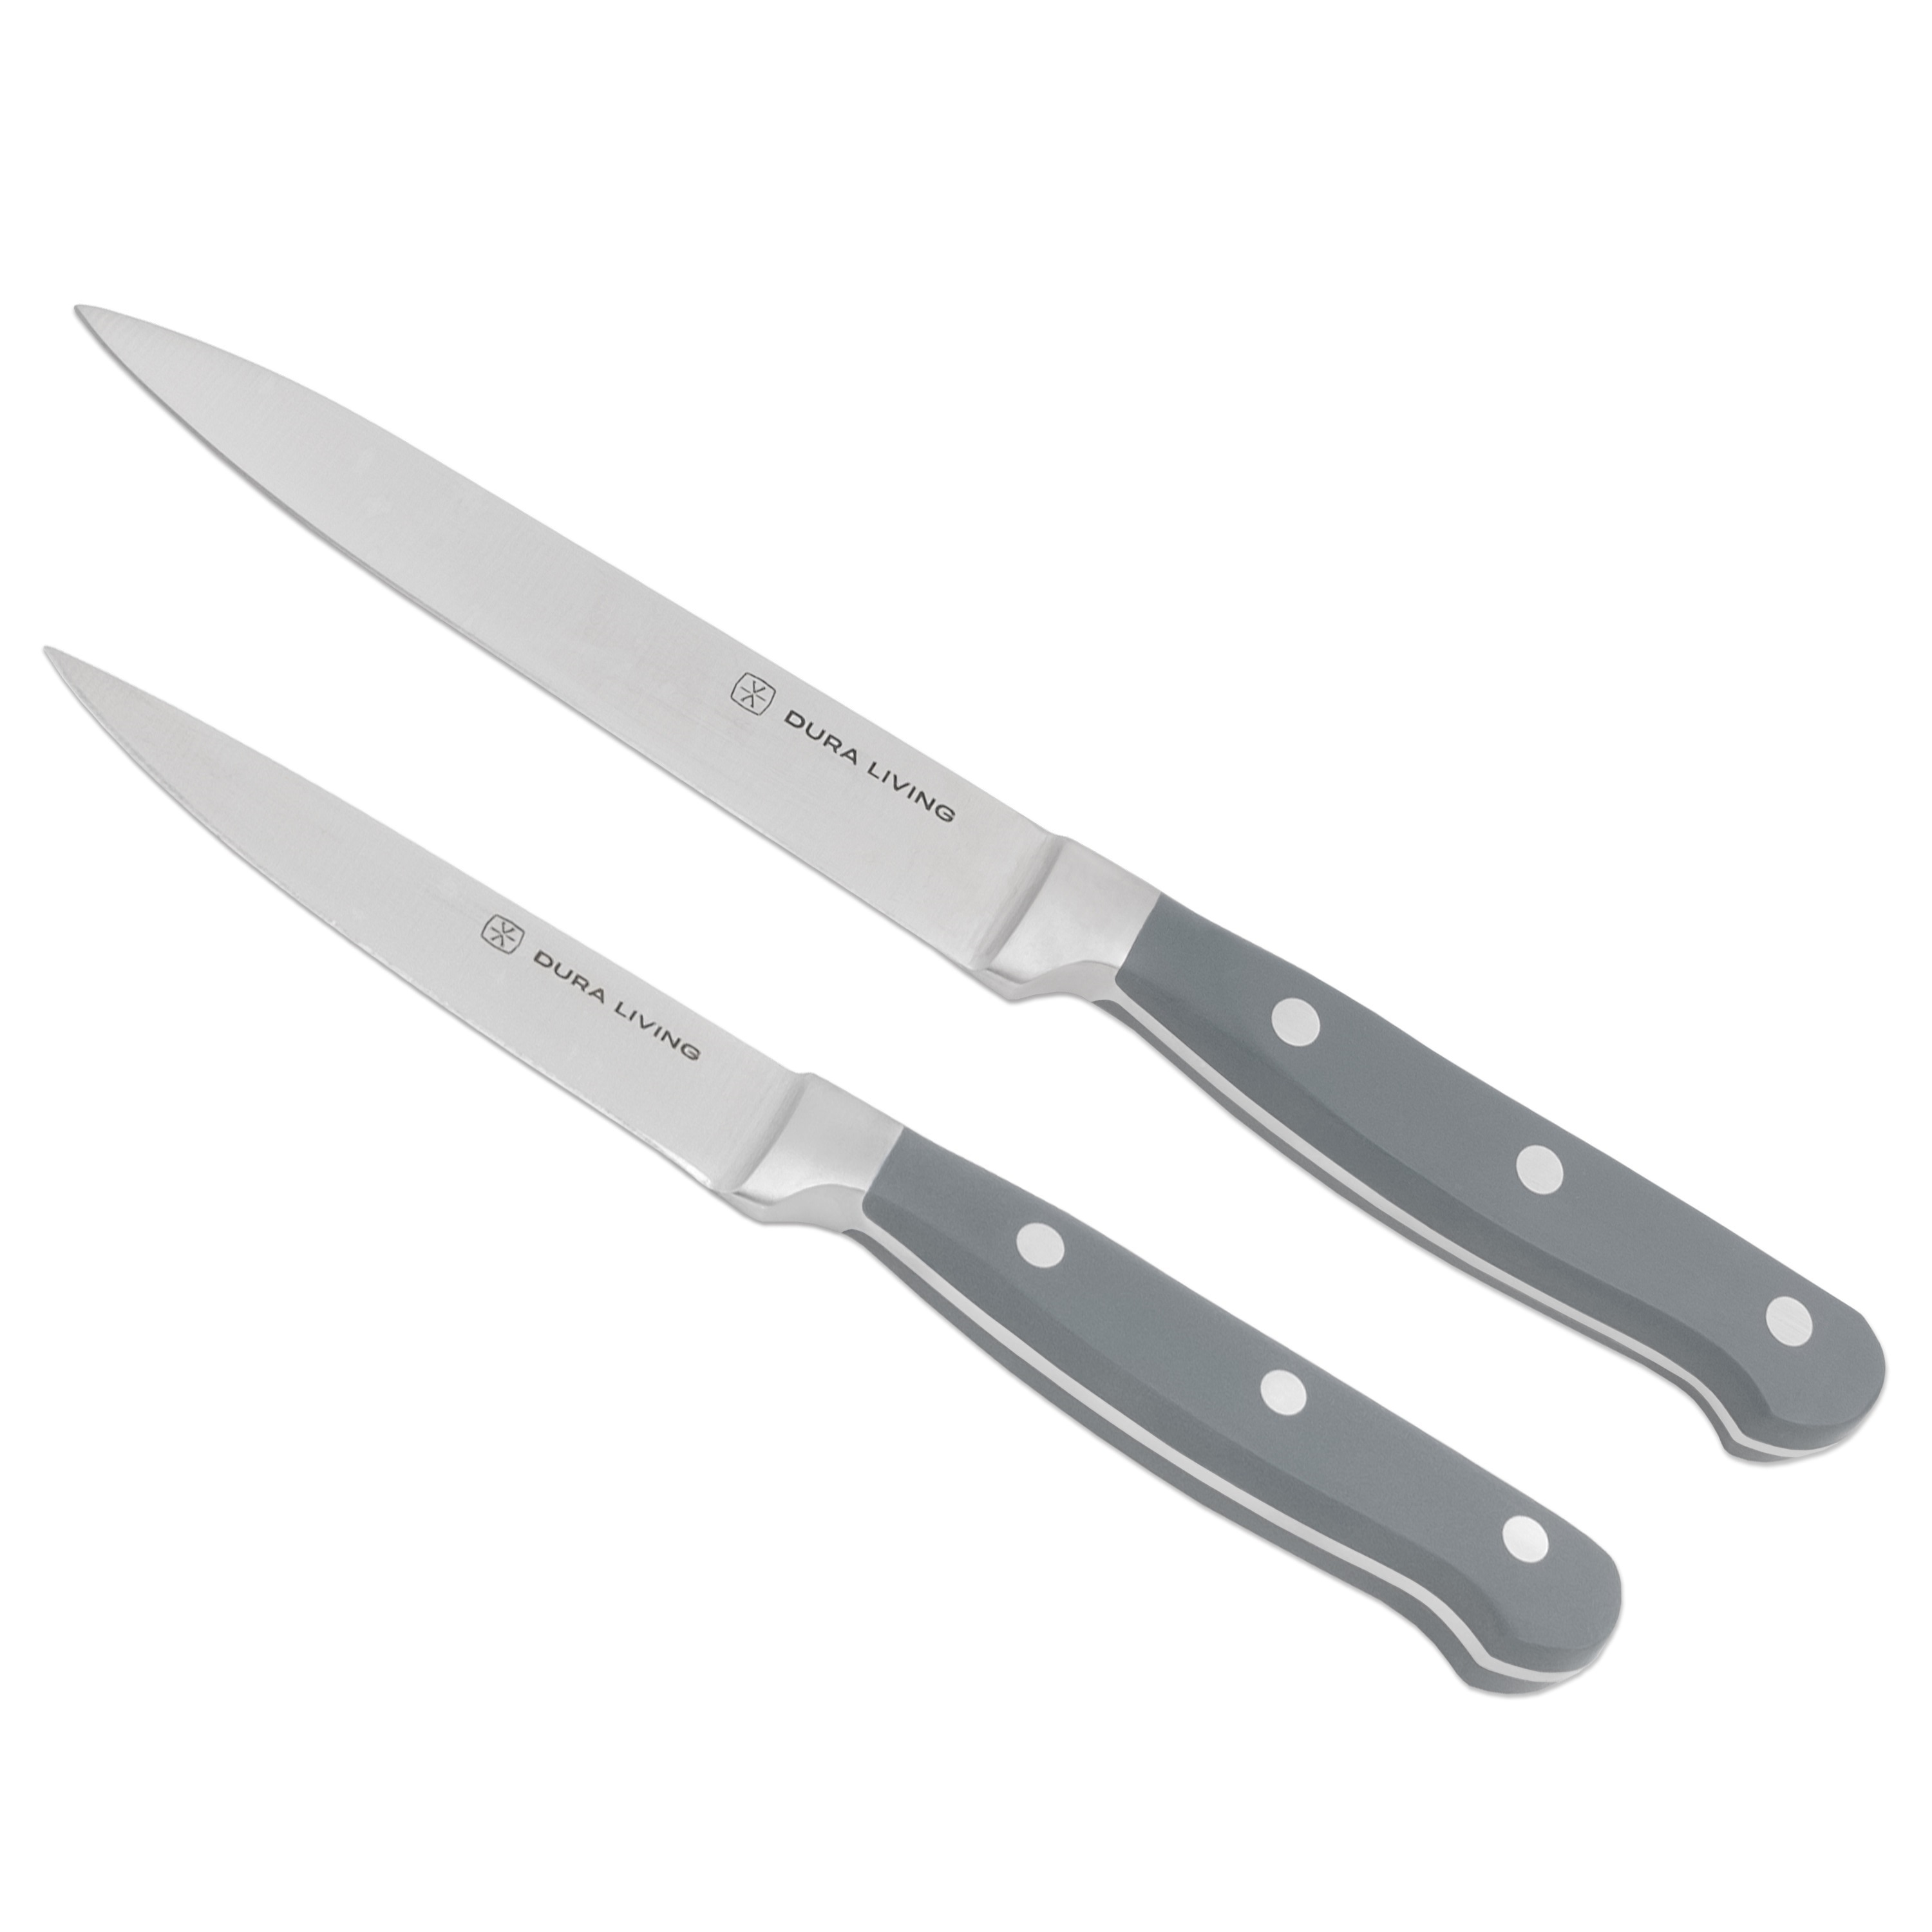 https://ak1.ostkcdn.com/images/products/is/images/direct/29f9eff5e1ea19d81f2e30b96d5f8f12ac0eba82/Dura-Living-2-Piece-Kitchen-Knife-Set---Superior-Forged-High-Carbon-Stainless-Steel-Sharp-Multipurpose-Cooking-Knives%2C-Gray.jpg